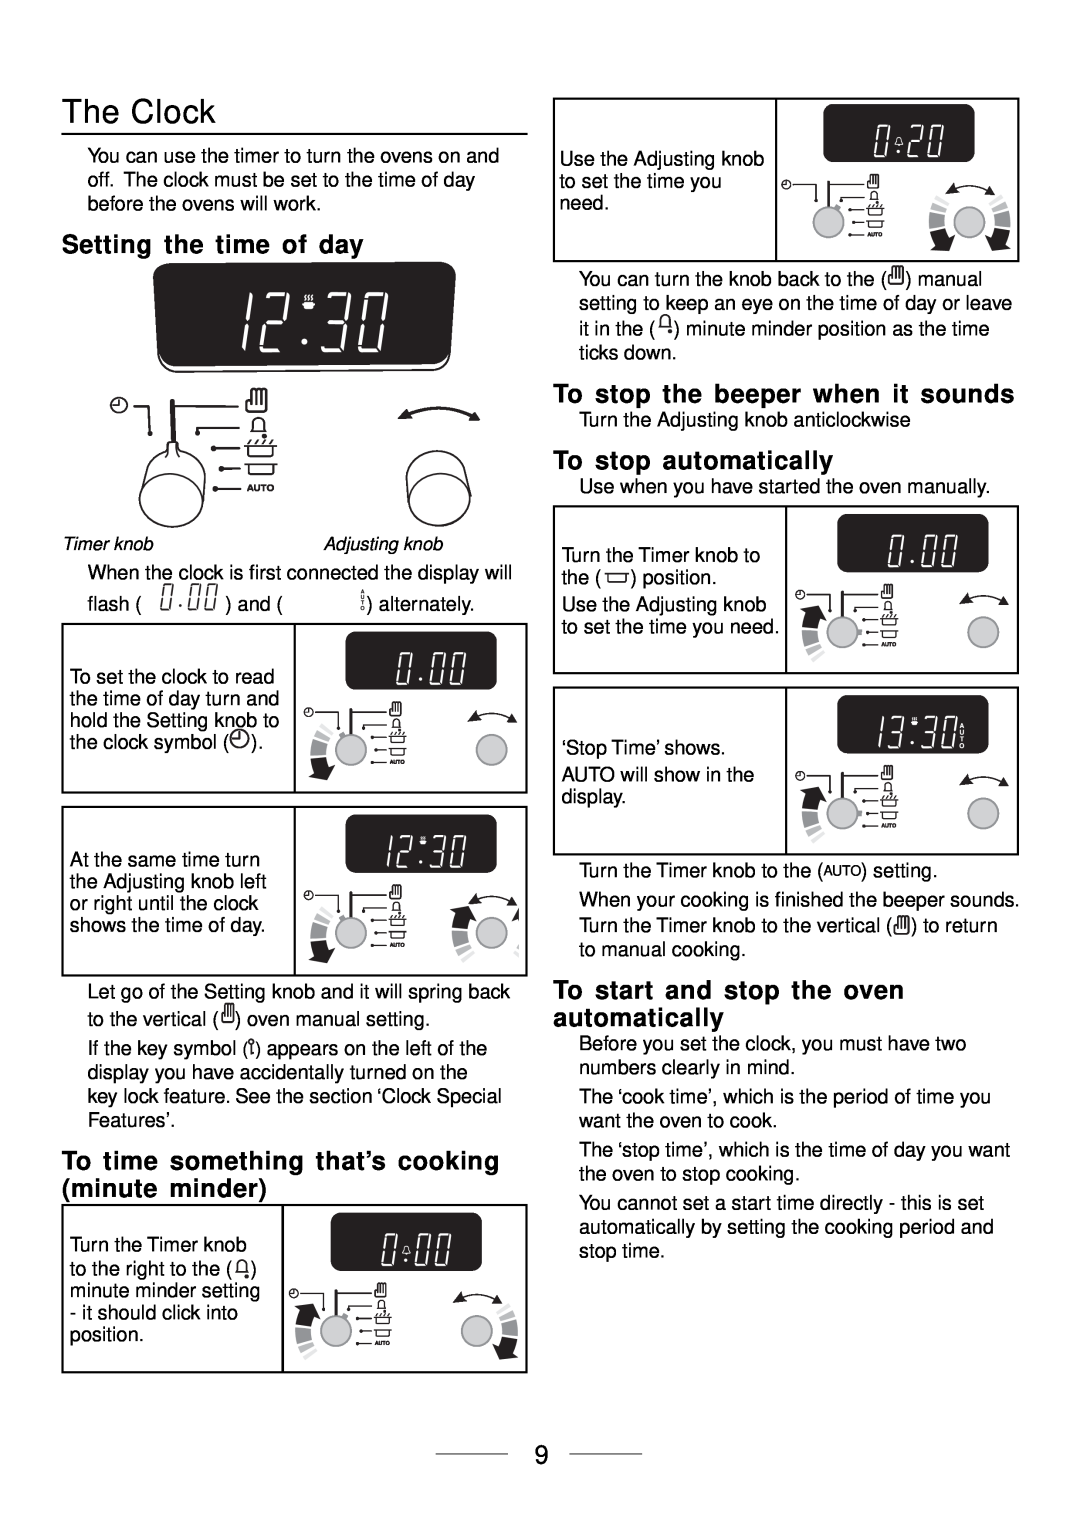 Maytag 110 The Clock, Setting the time of day, To time something that’s cooking minute minder, To stop automatically 